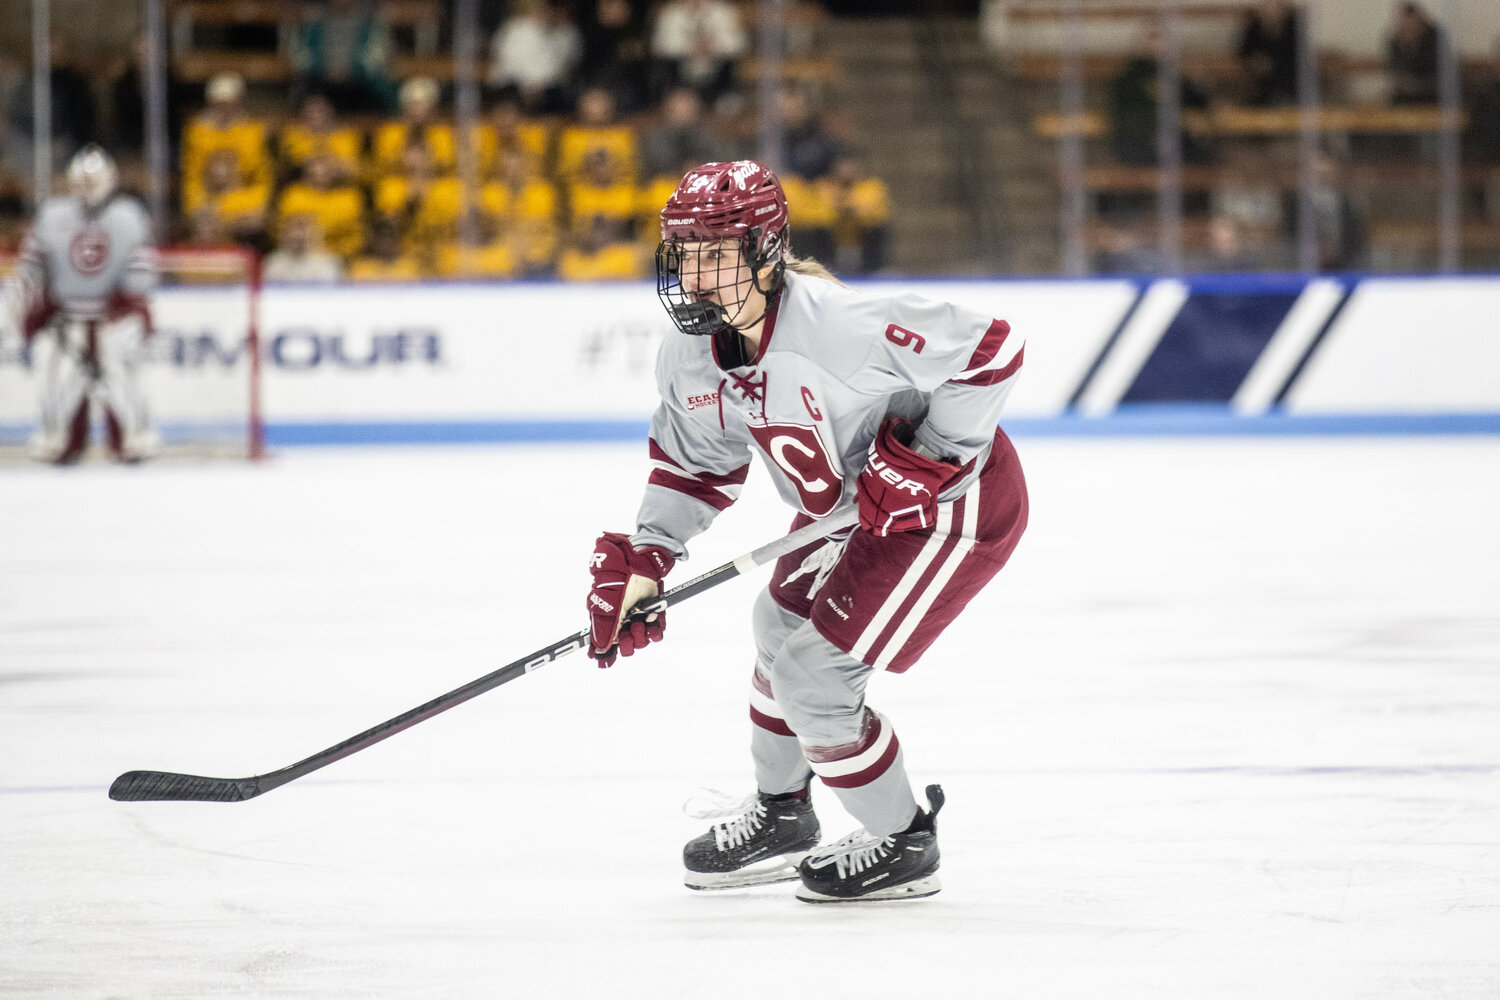 Danielle Serdachny of Colgate women’s hockey is the runner-up for the this year’s Patty Kazmaier Memorial Award for top NCAA Division I women’s hockey player. Serdachny tallied 25 goals and 46 assists for a career-high 71 points, leading the nation in points per game.